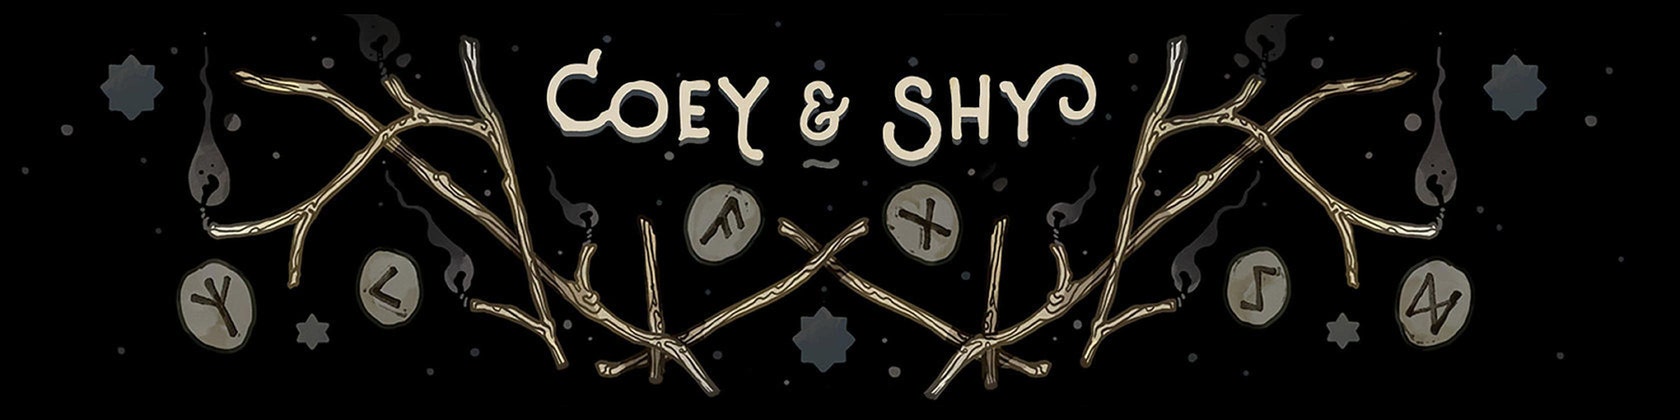 Shy & Coey: Shadow Box Occult Insects (Pins, Stickers)